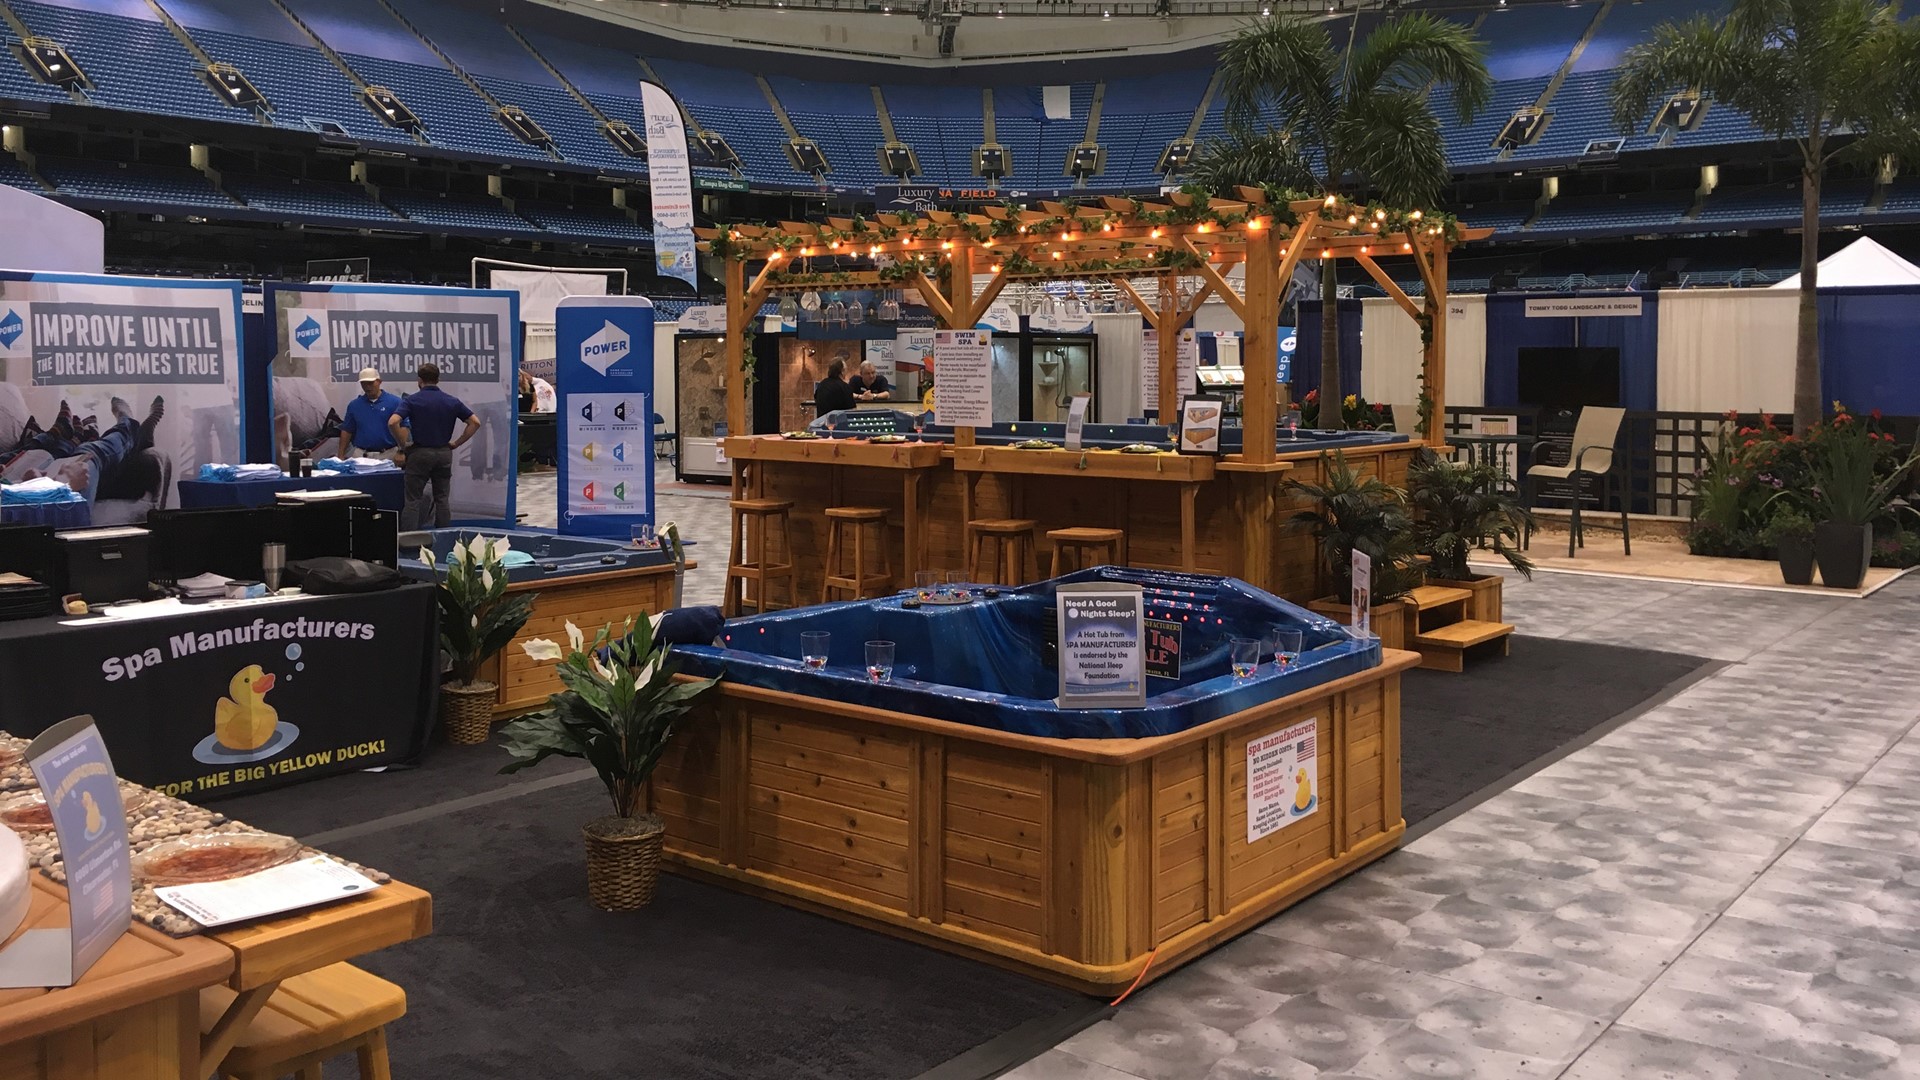 Tampa Bay Home Show kicks off at Tropicana Field in St. Petersburg